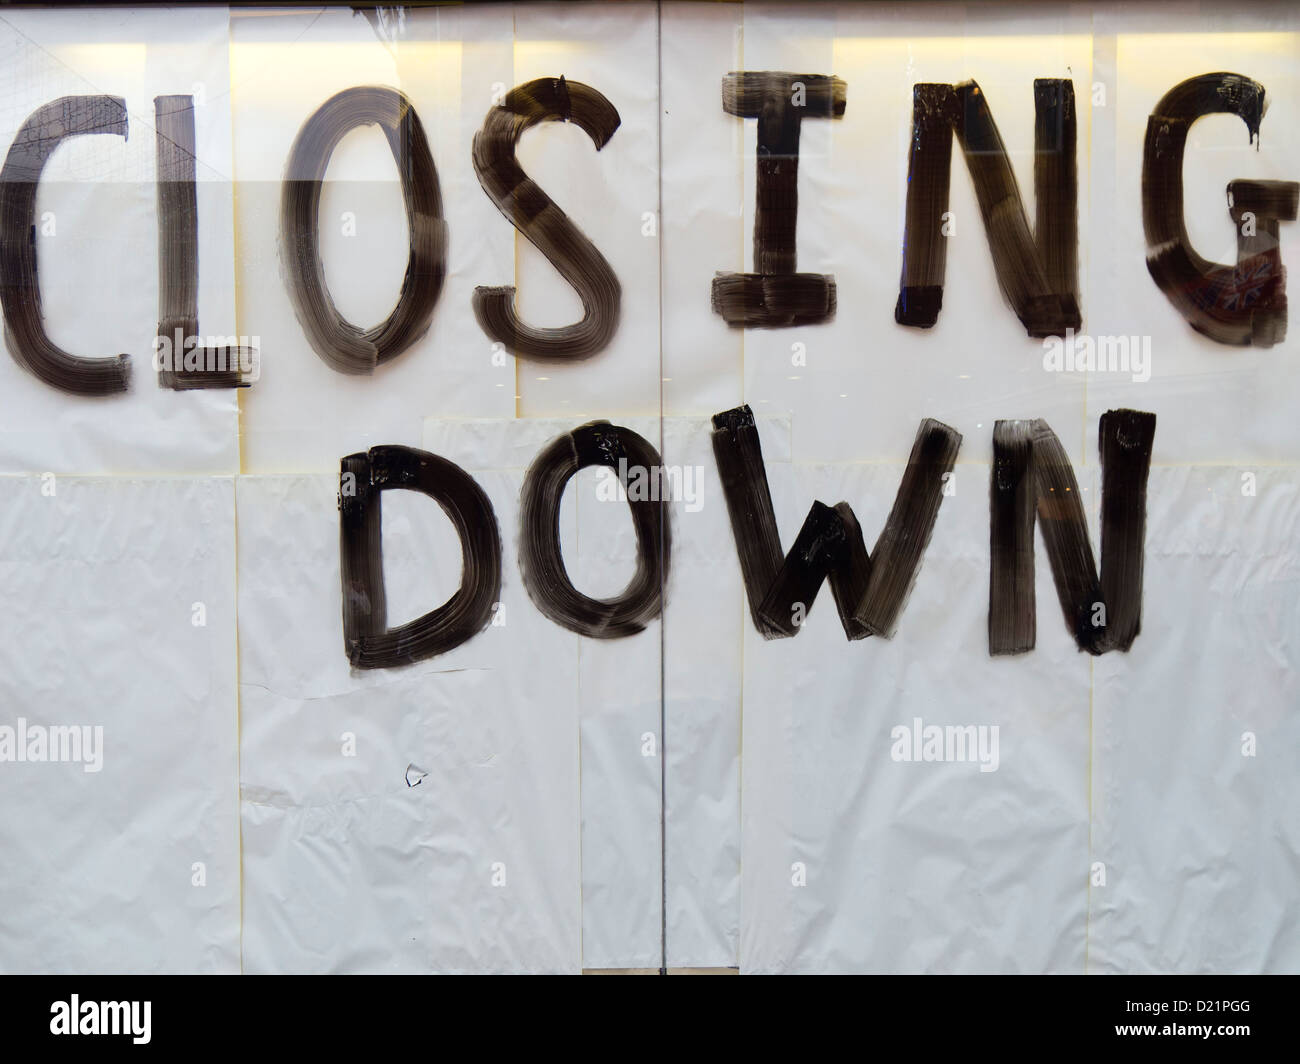 Closing down shop going out of business. Stock Photo